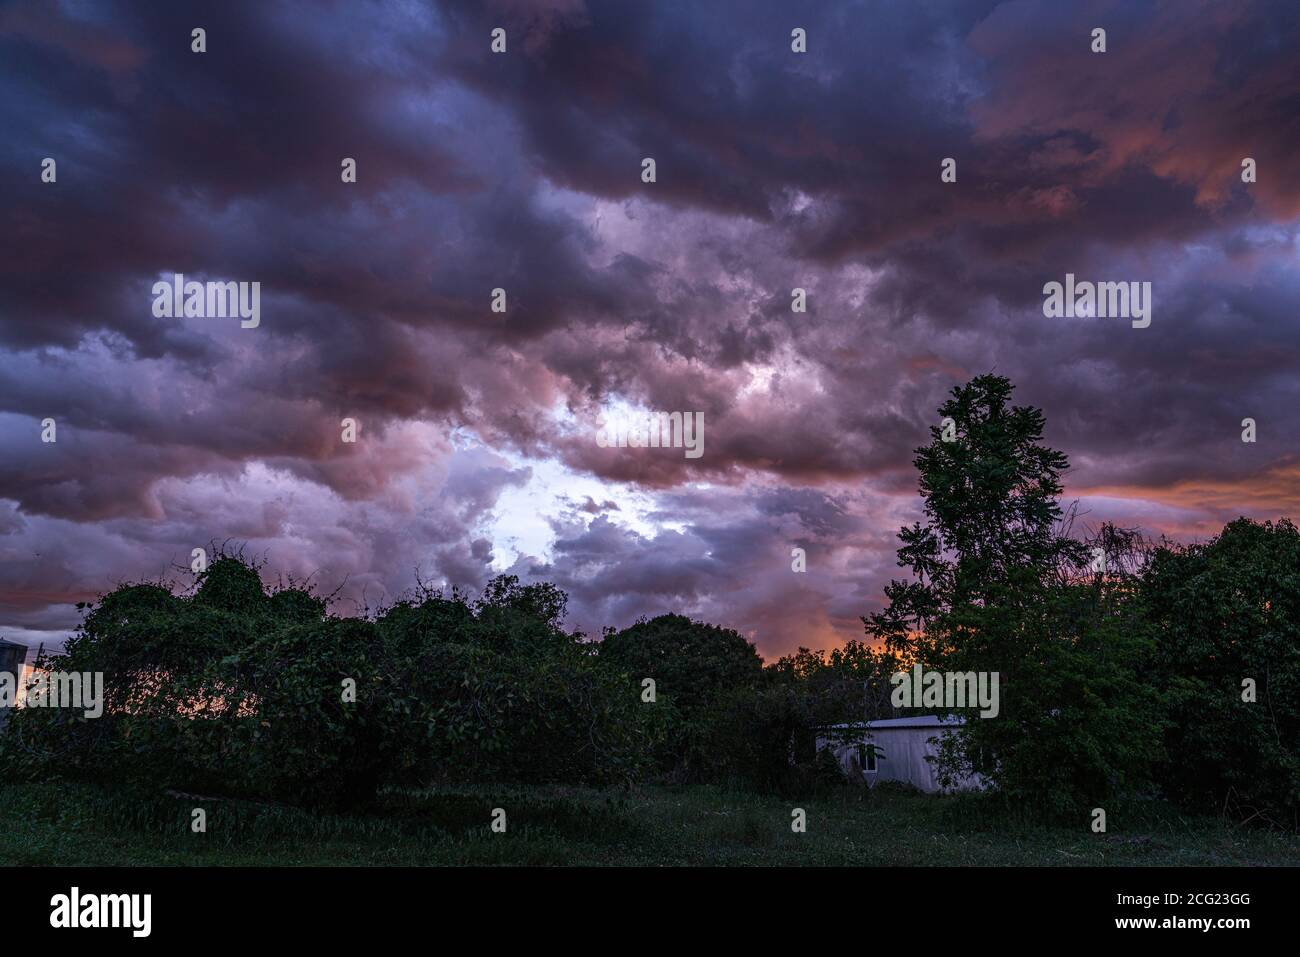 Dark stormy rain clouds flow over the sky in the evening in rainy season. Stock Photo